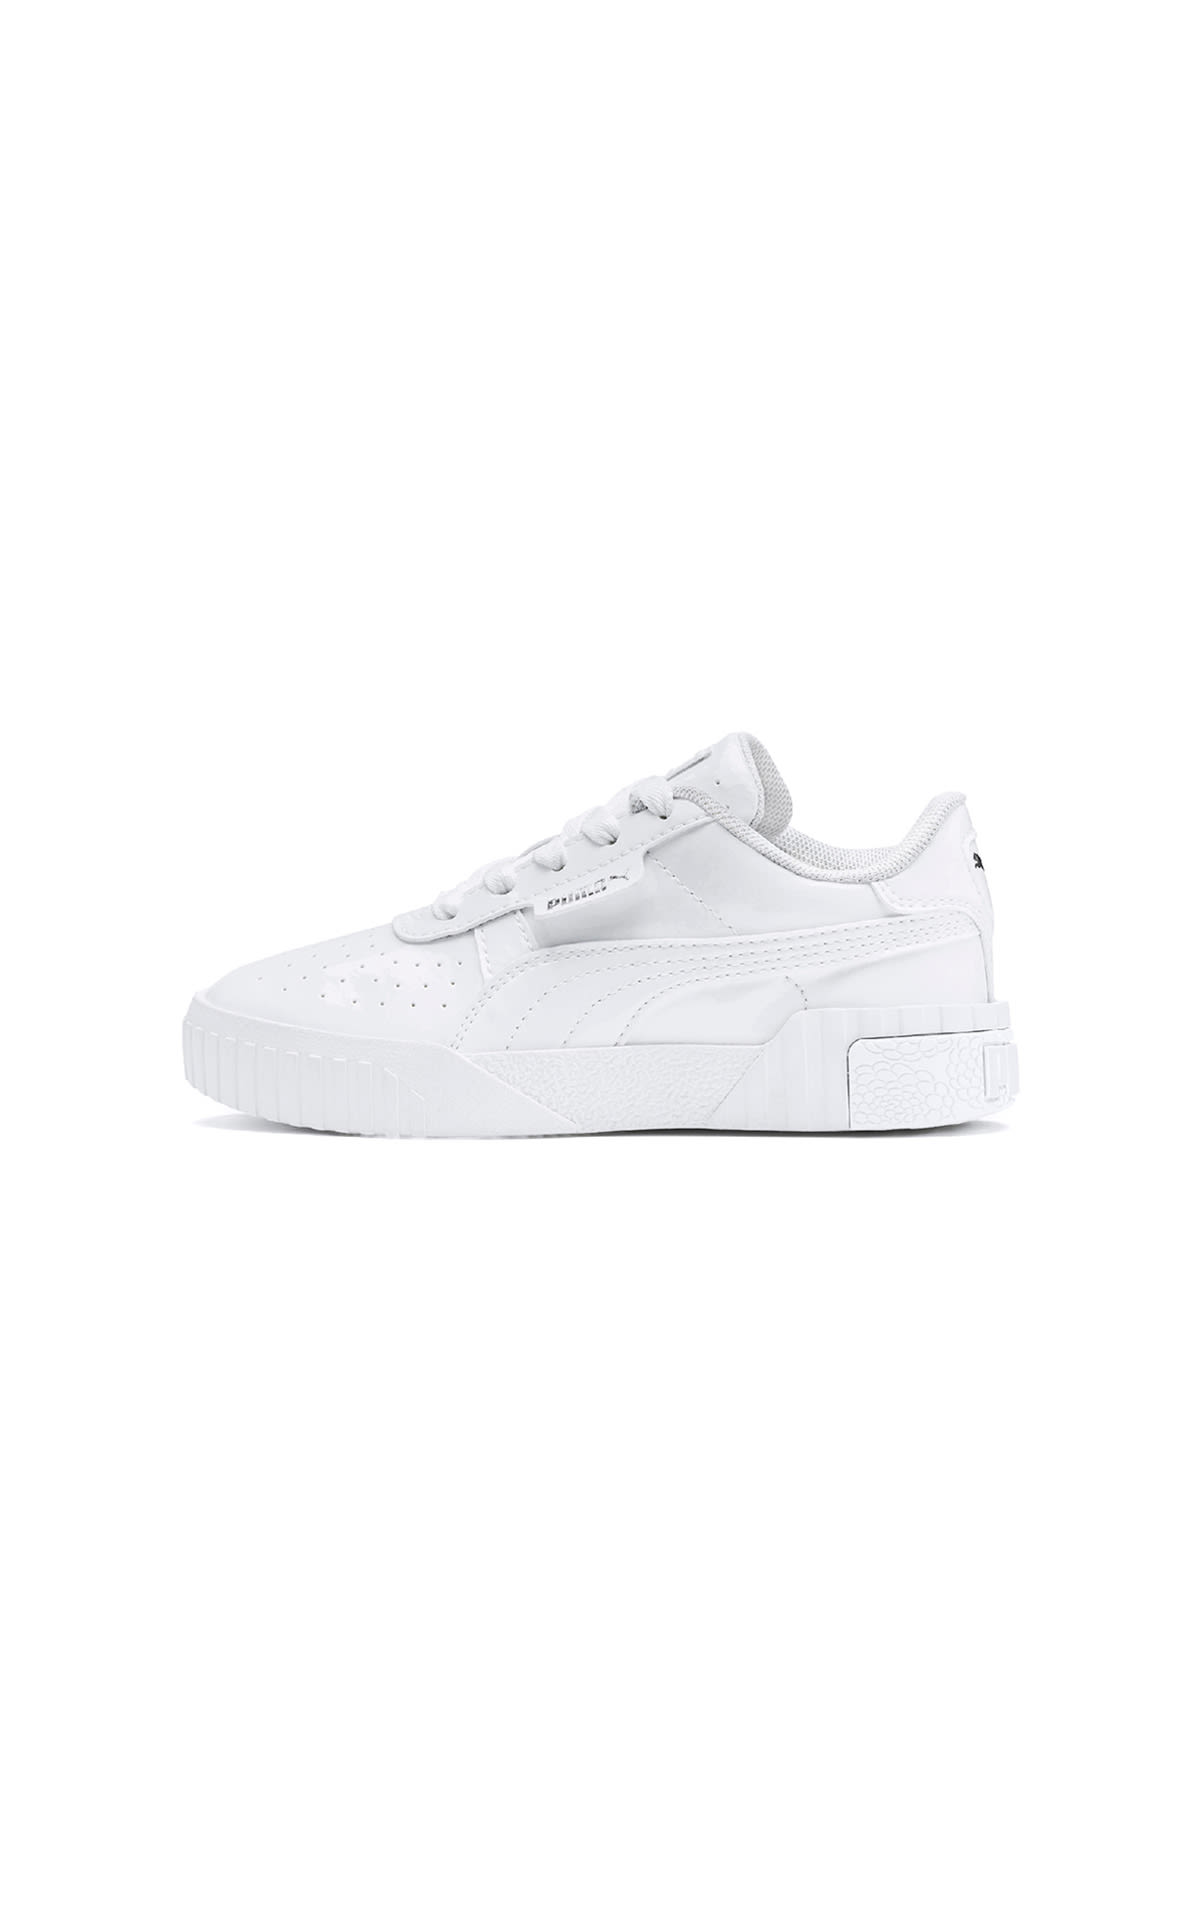 PUMA Cali patent PS in white at The Bicester Village Shopping Collection